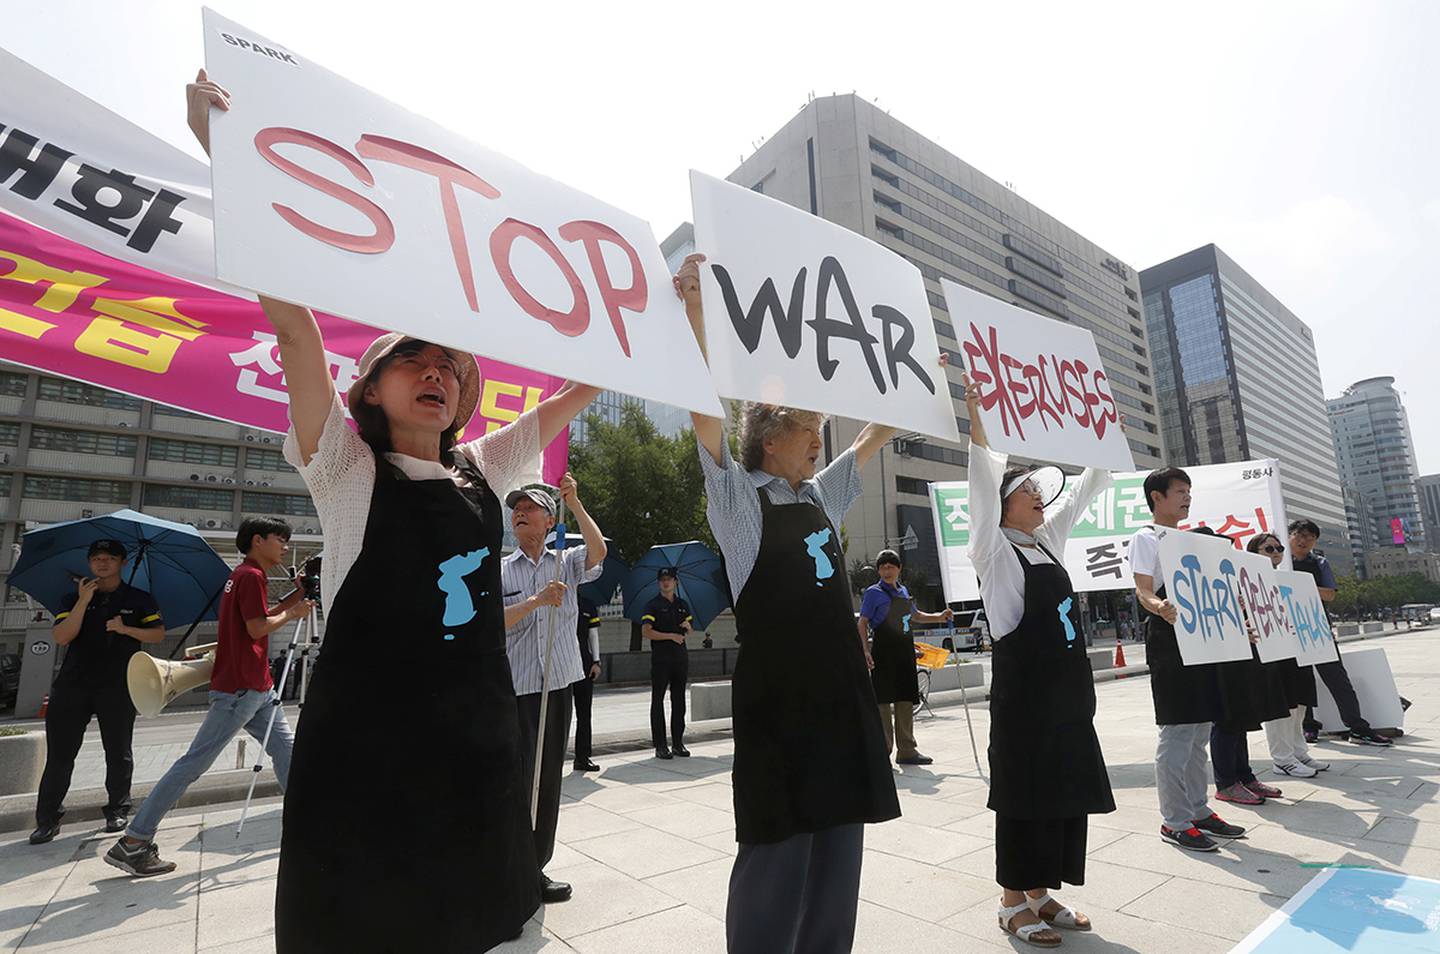 Protesters hold up placards to oppose planned joint military exercises between South Korea and the United States near the U.S. Embassy in Seoul